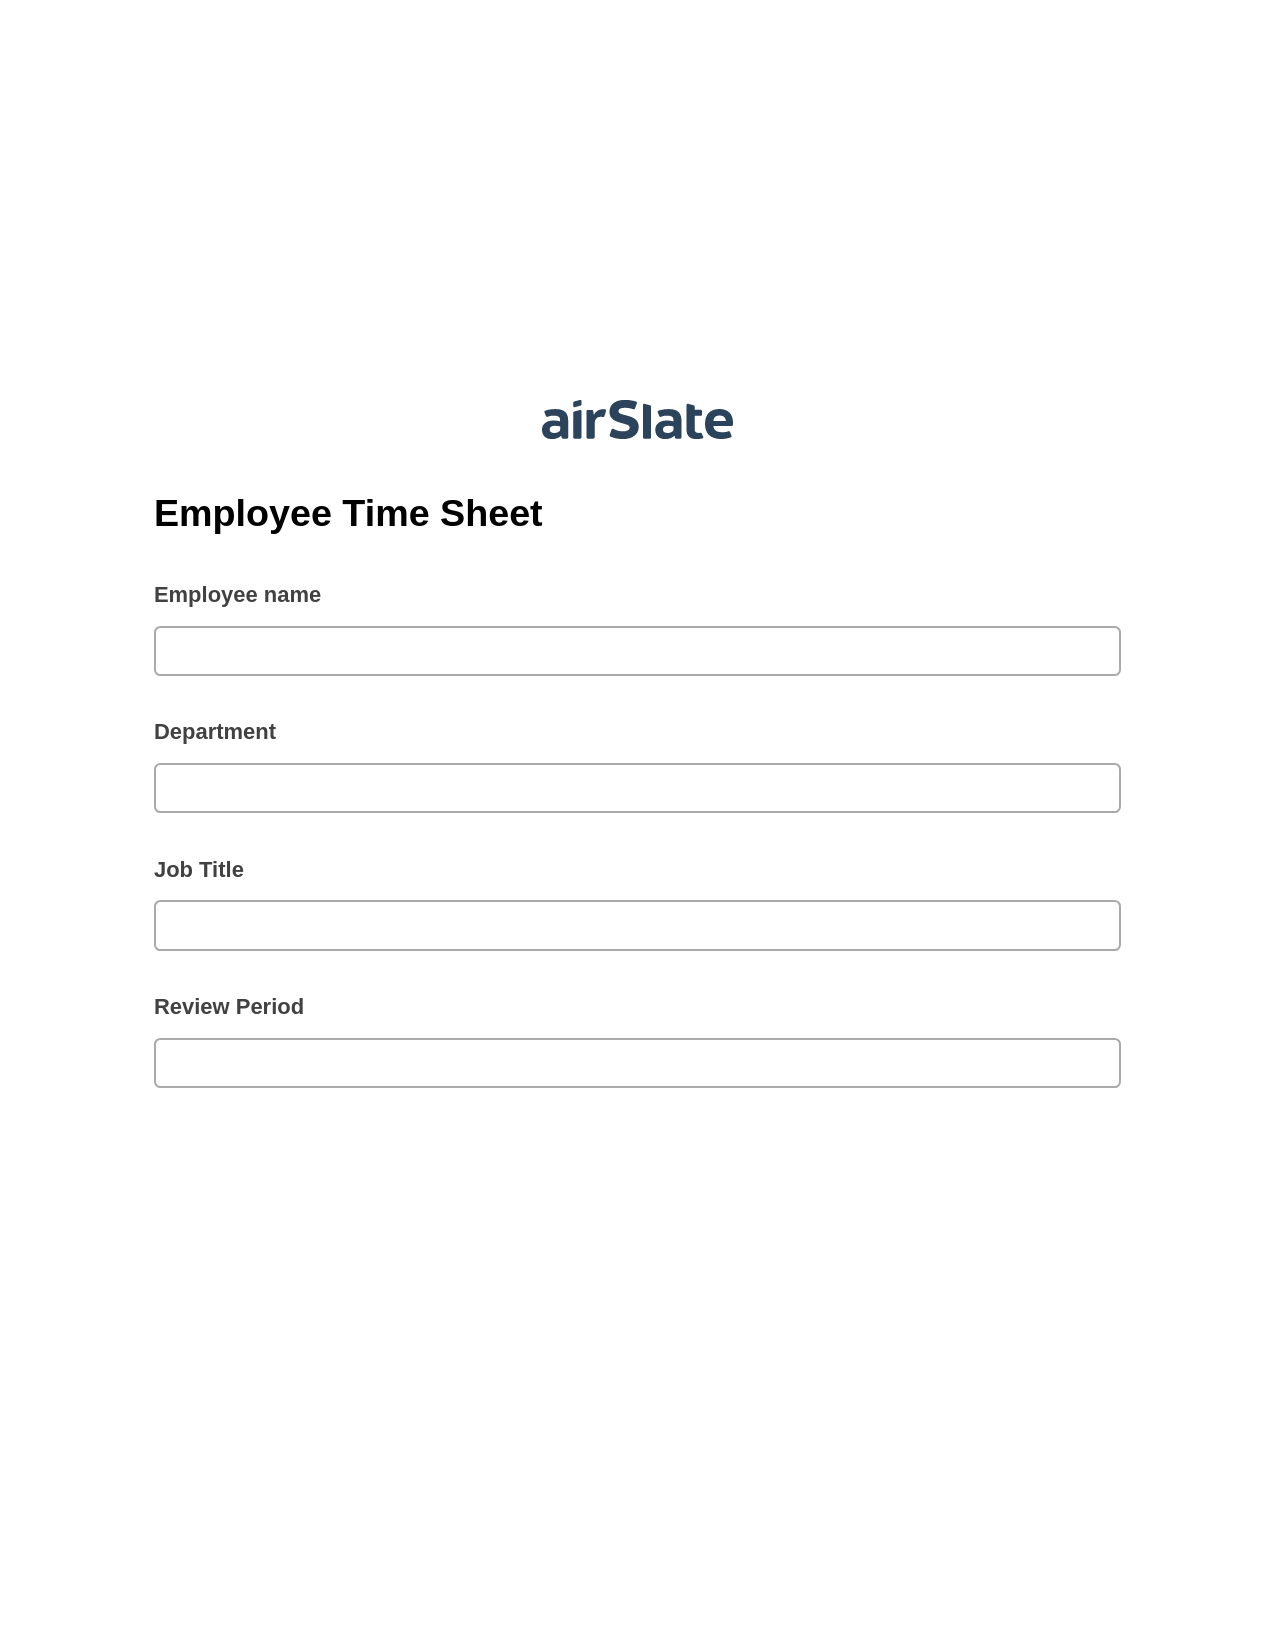 Employee Time Sheet Pre-fill from Salesforce Records Bot, Update Audit Trail Bot, Archive to SharePoint Folder Bot